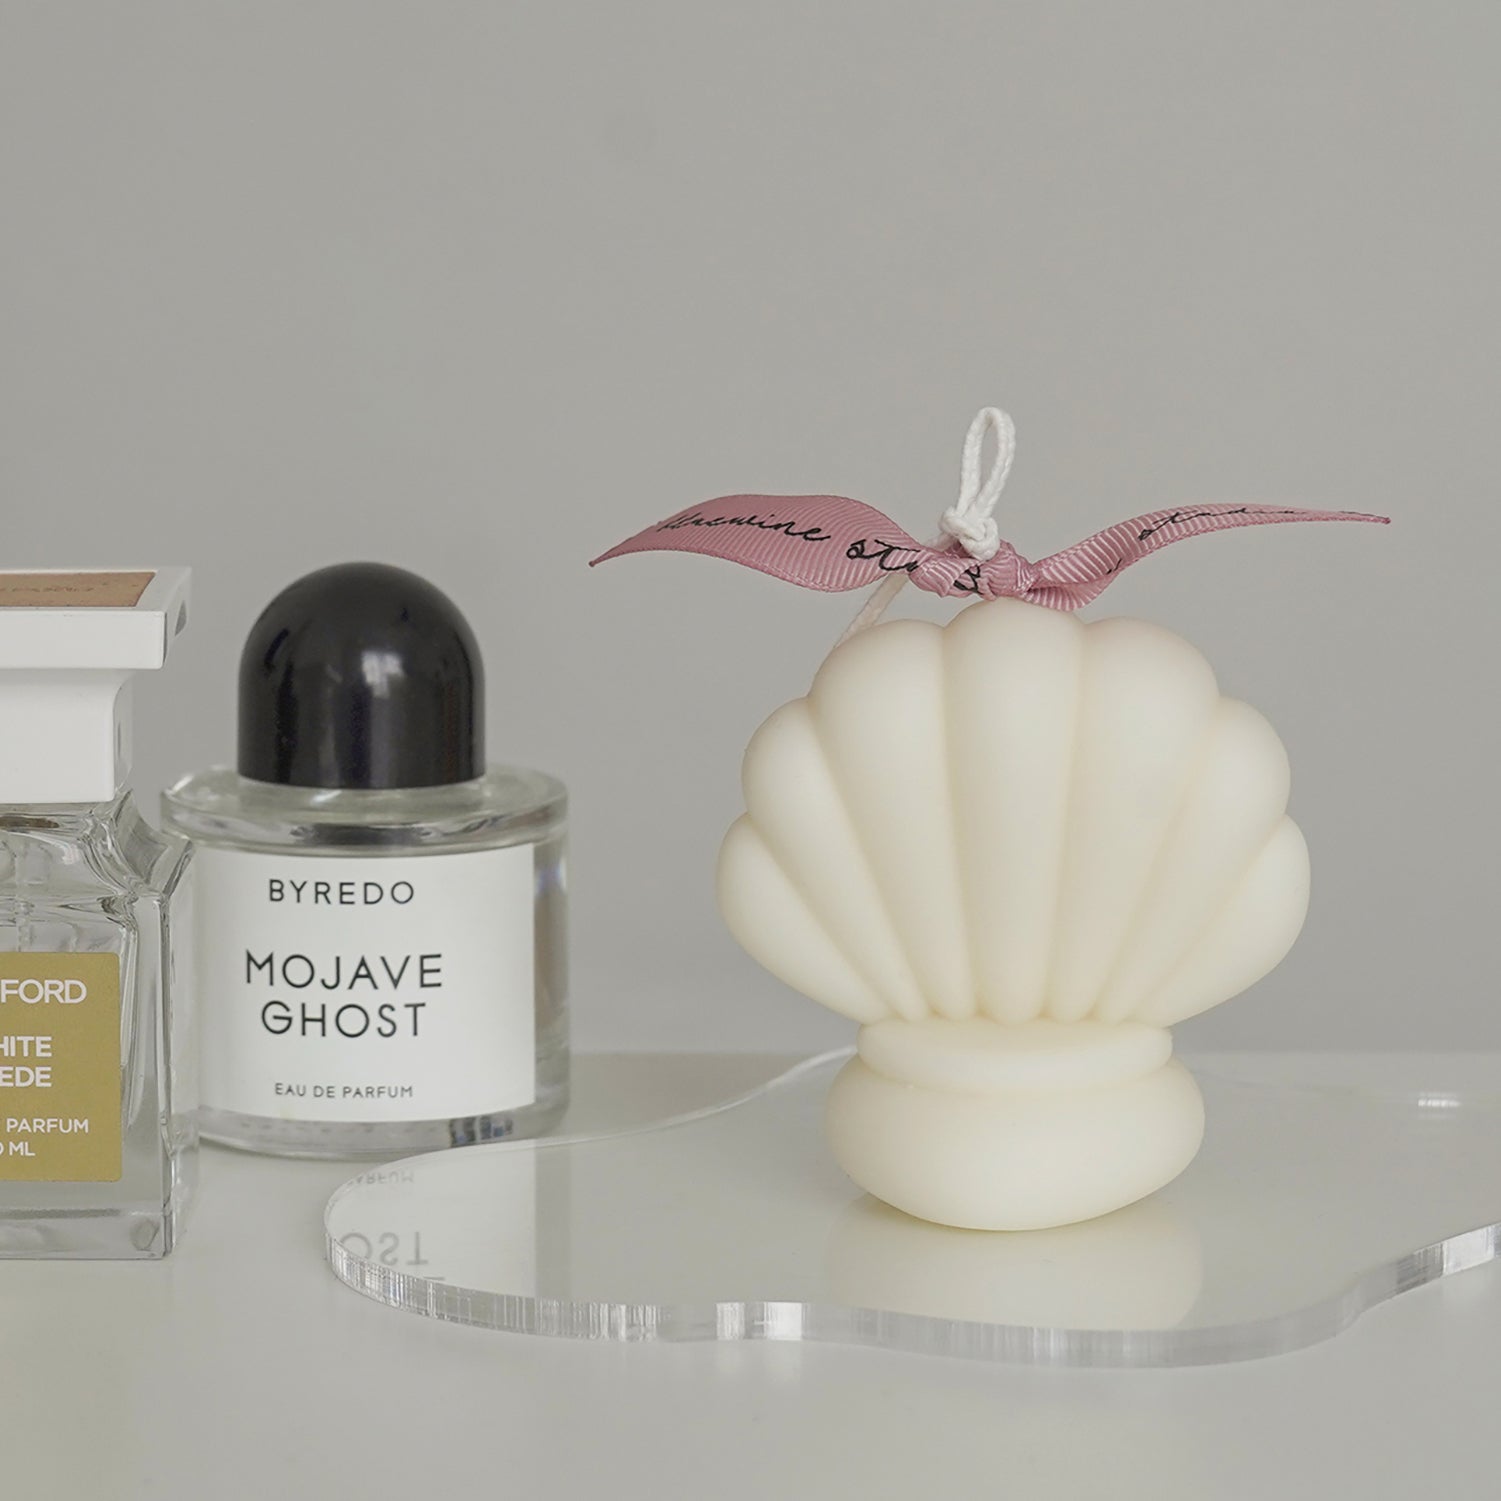 shell shaped soy pillar candle on a clear irregular shape acrylic coaster and perfumes on vanity table